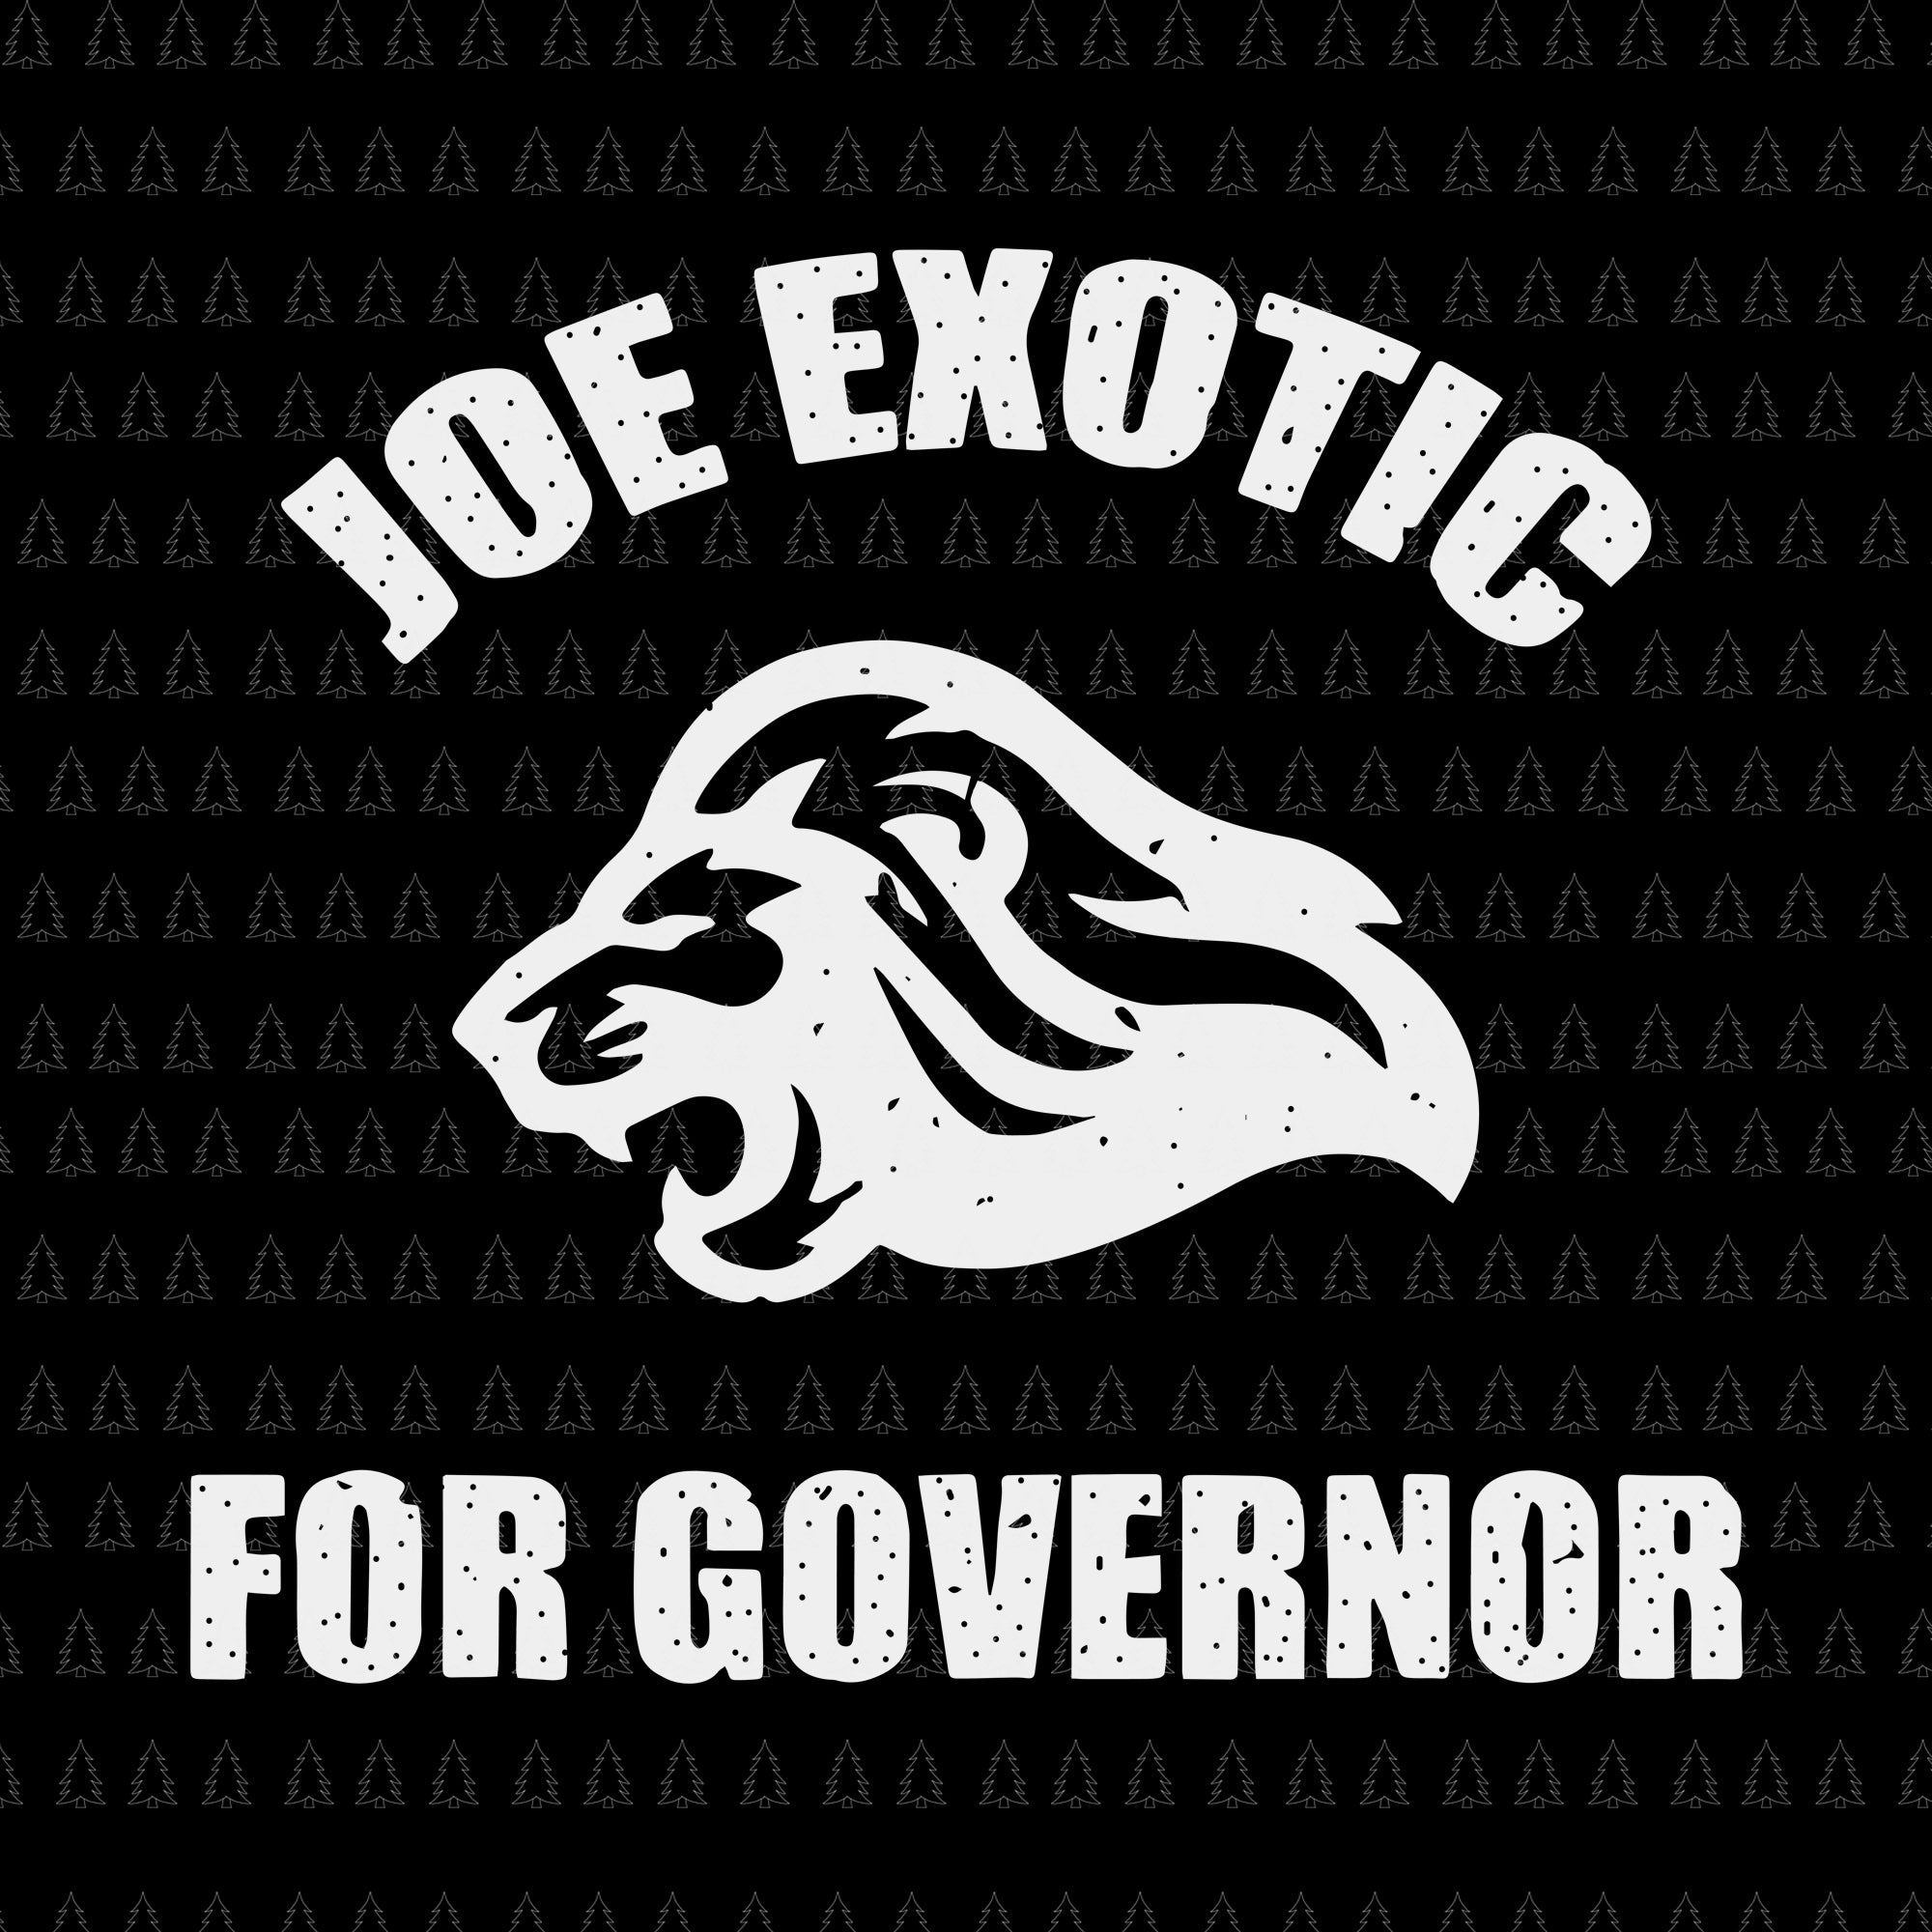 Joe exotic for governor svg, joe exotic for governor, joe exotic for governor png, joe exotic for governor